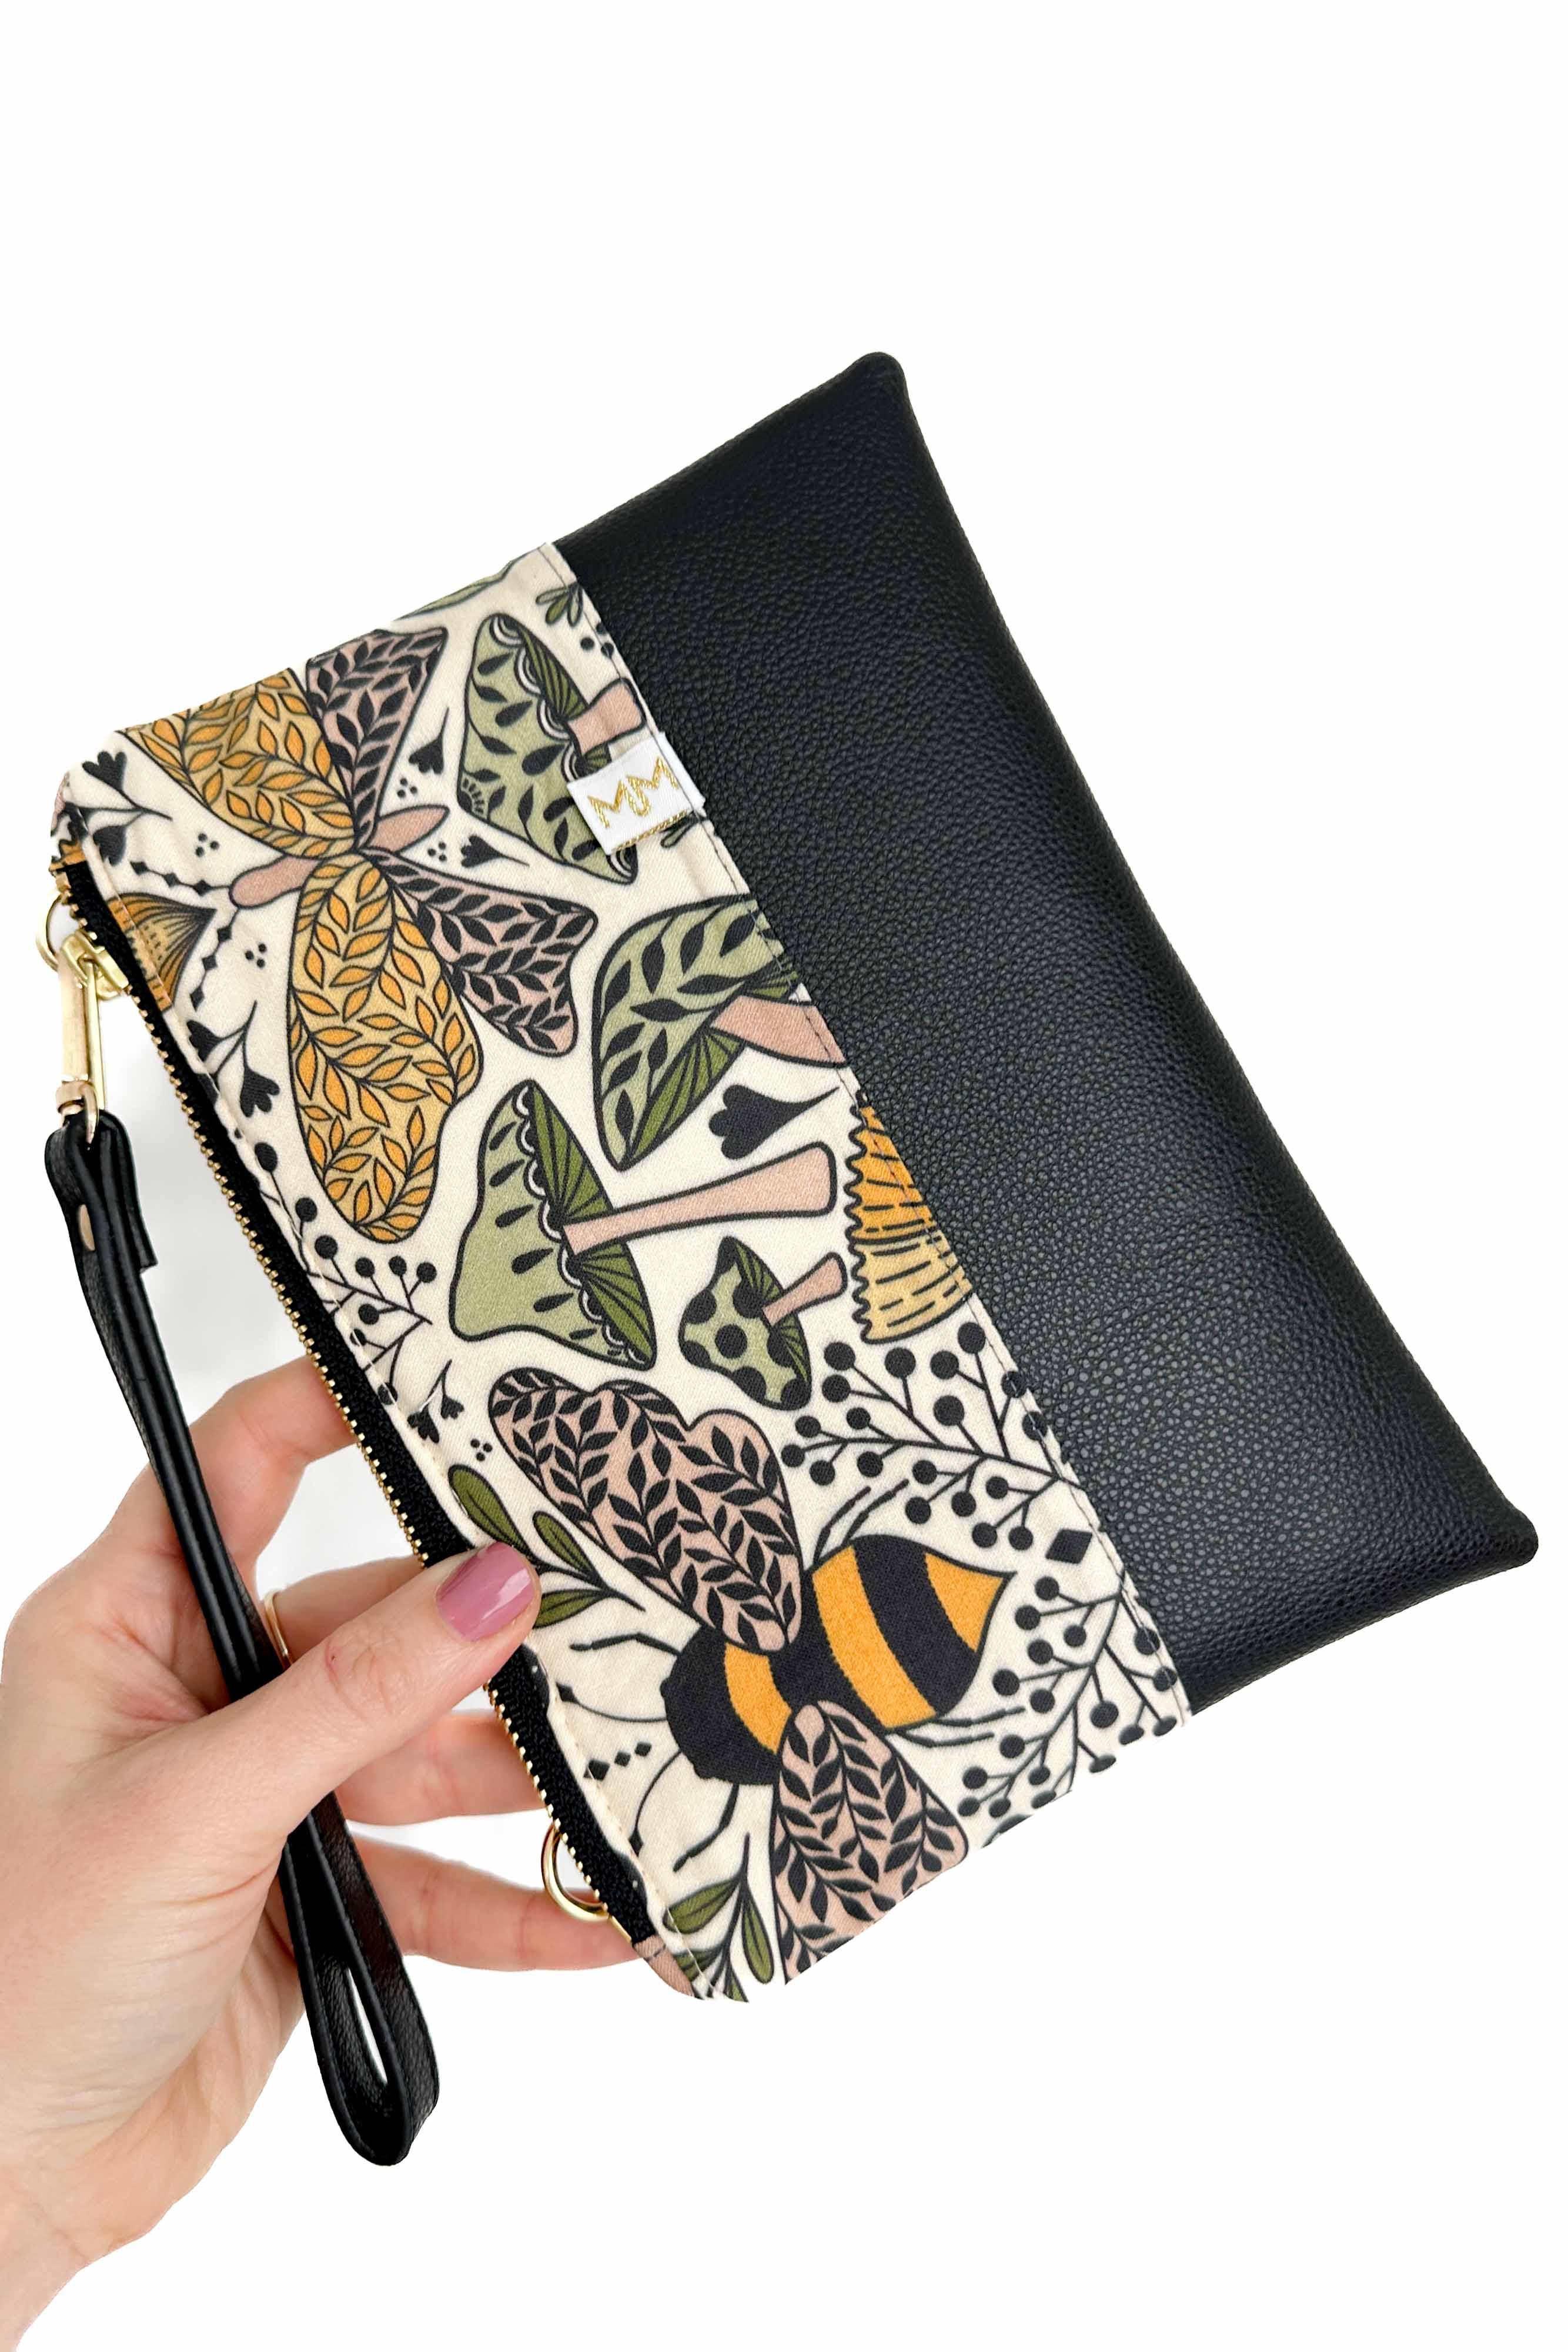 Mushroom Bee Convertible Crossbody Wristlet+ with Compartments READY TO SHIP - Modern Makerie